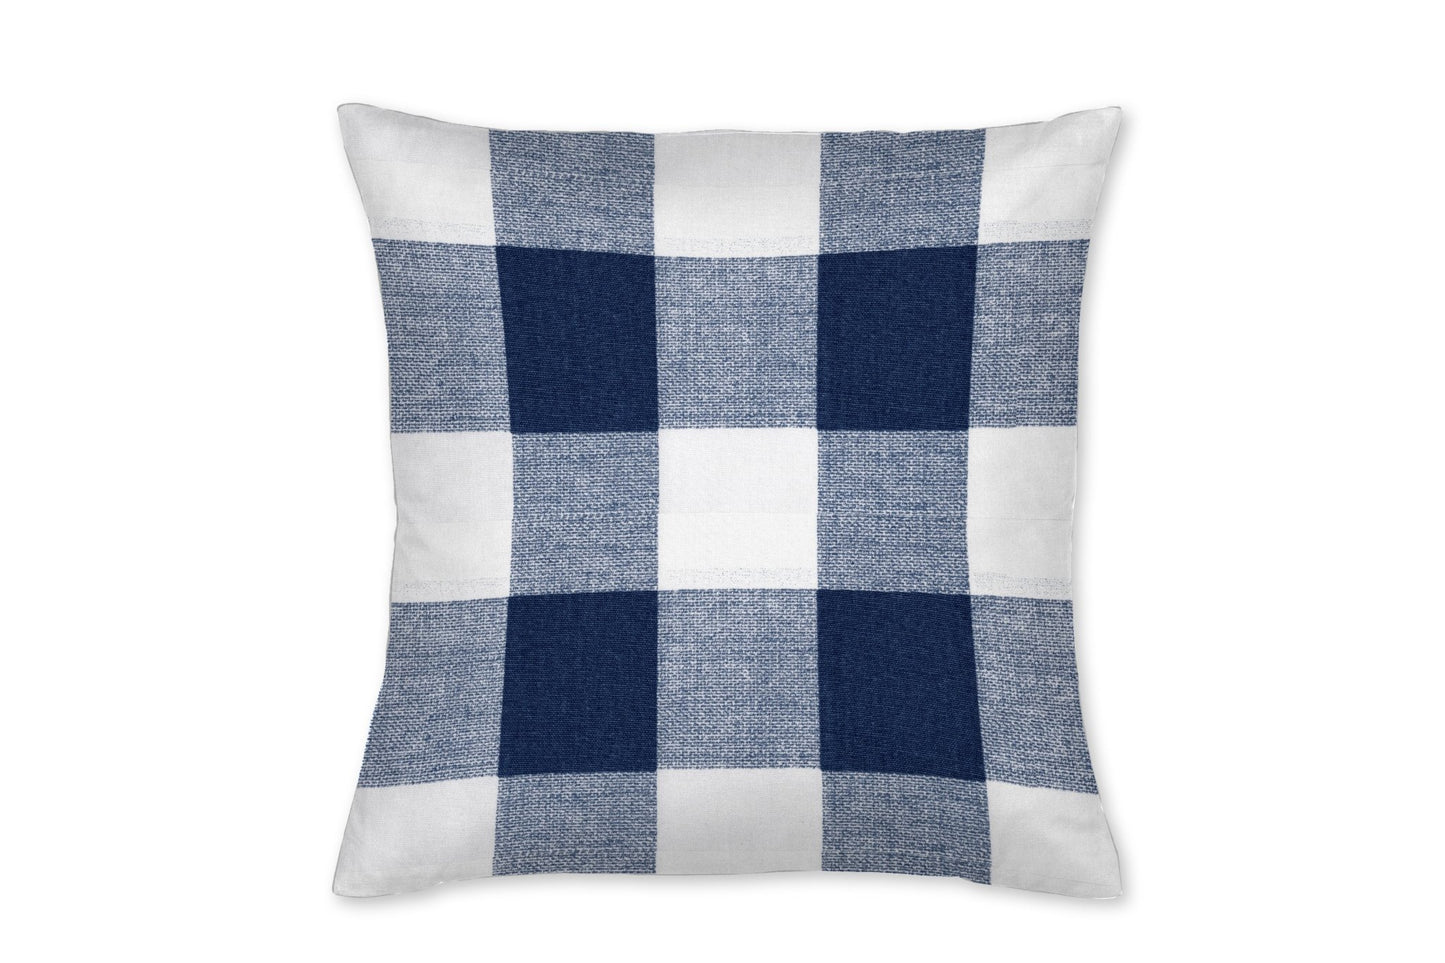 Gray and Navy Buffalo Plaid Throw Pillow - New Arrivals Inc